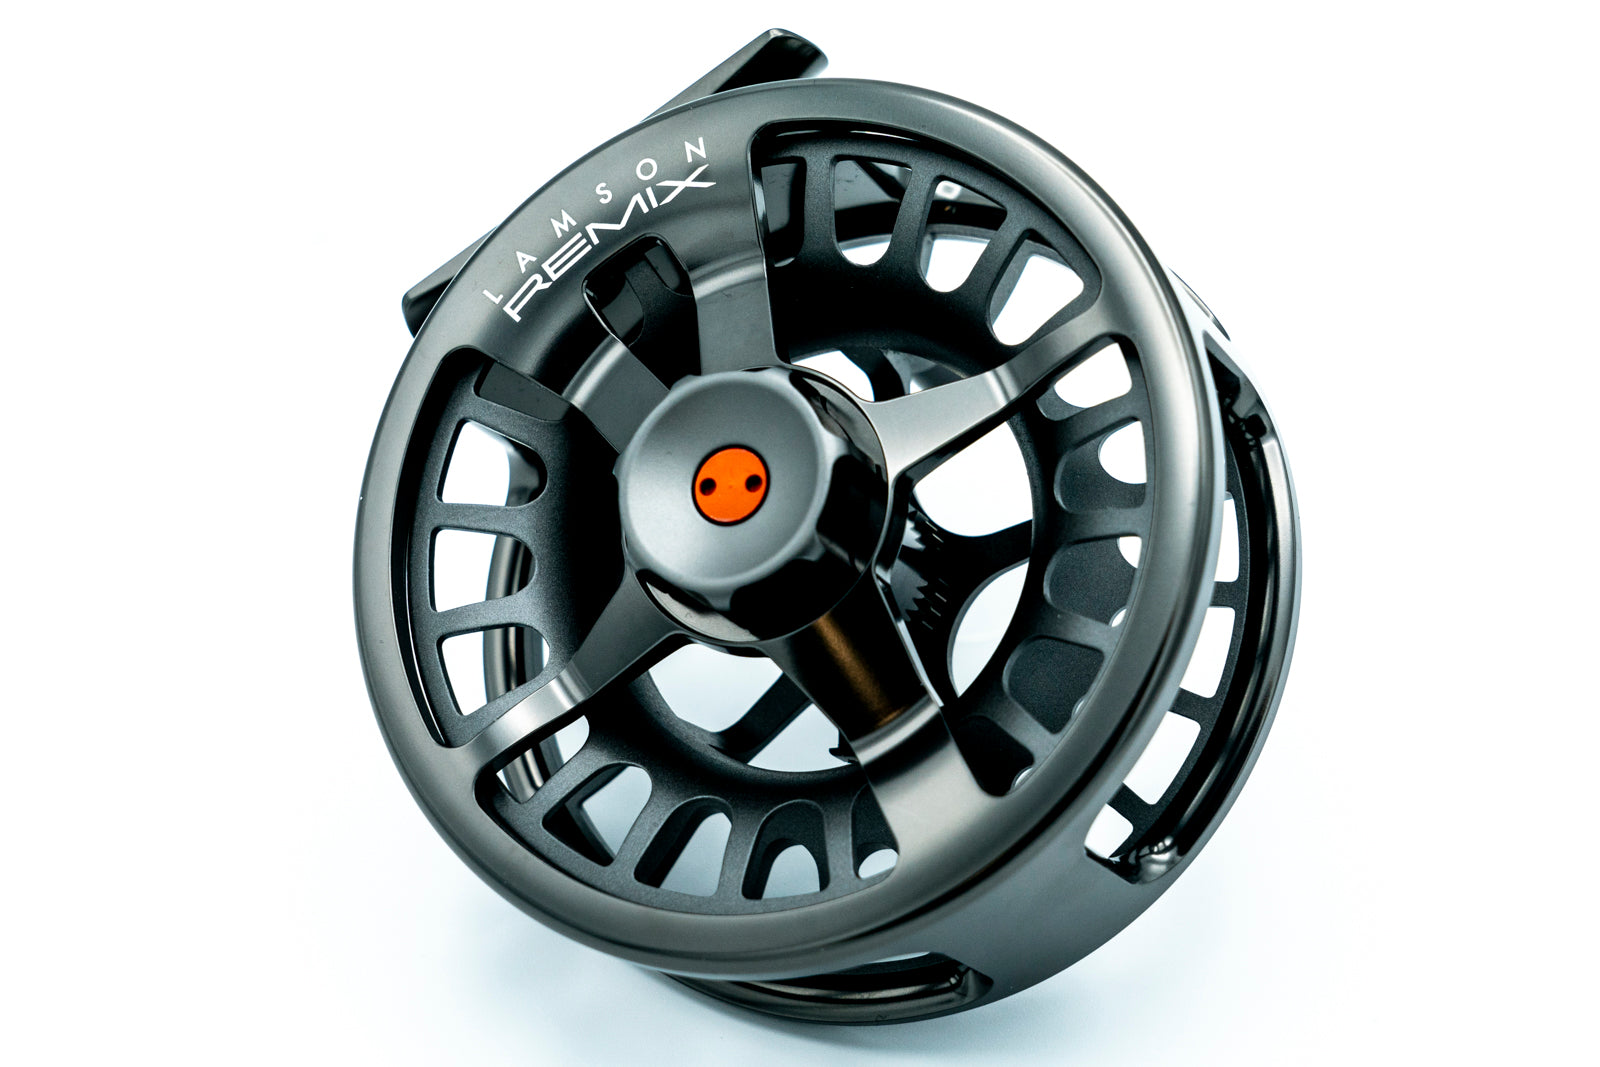 2014 is Litespeed re-loaded. For years an iconic ultra-large arbor reel, Litespeed has now been refined for even higher retrieve rate, improved ergonomics, easier line management and less mass.